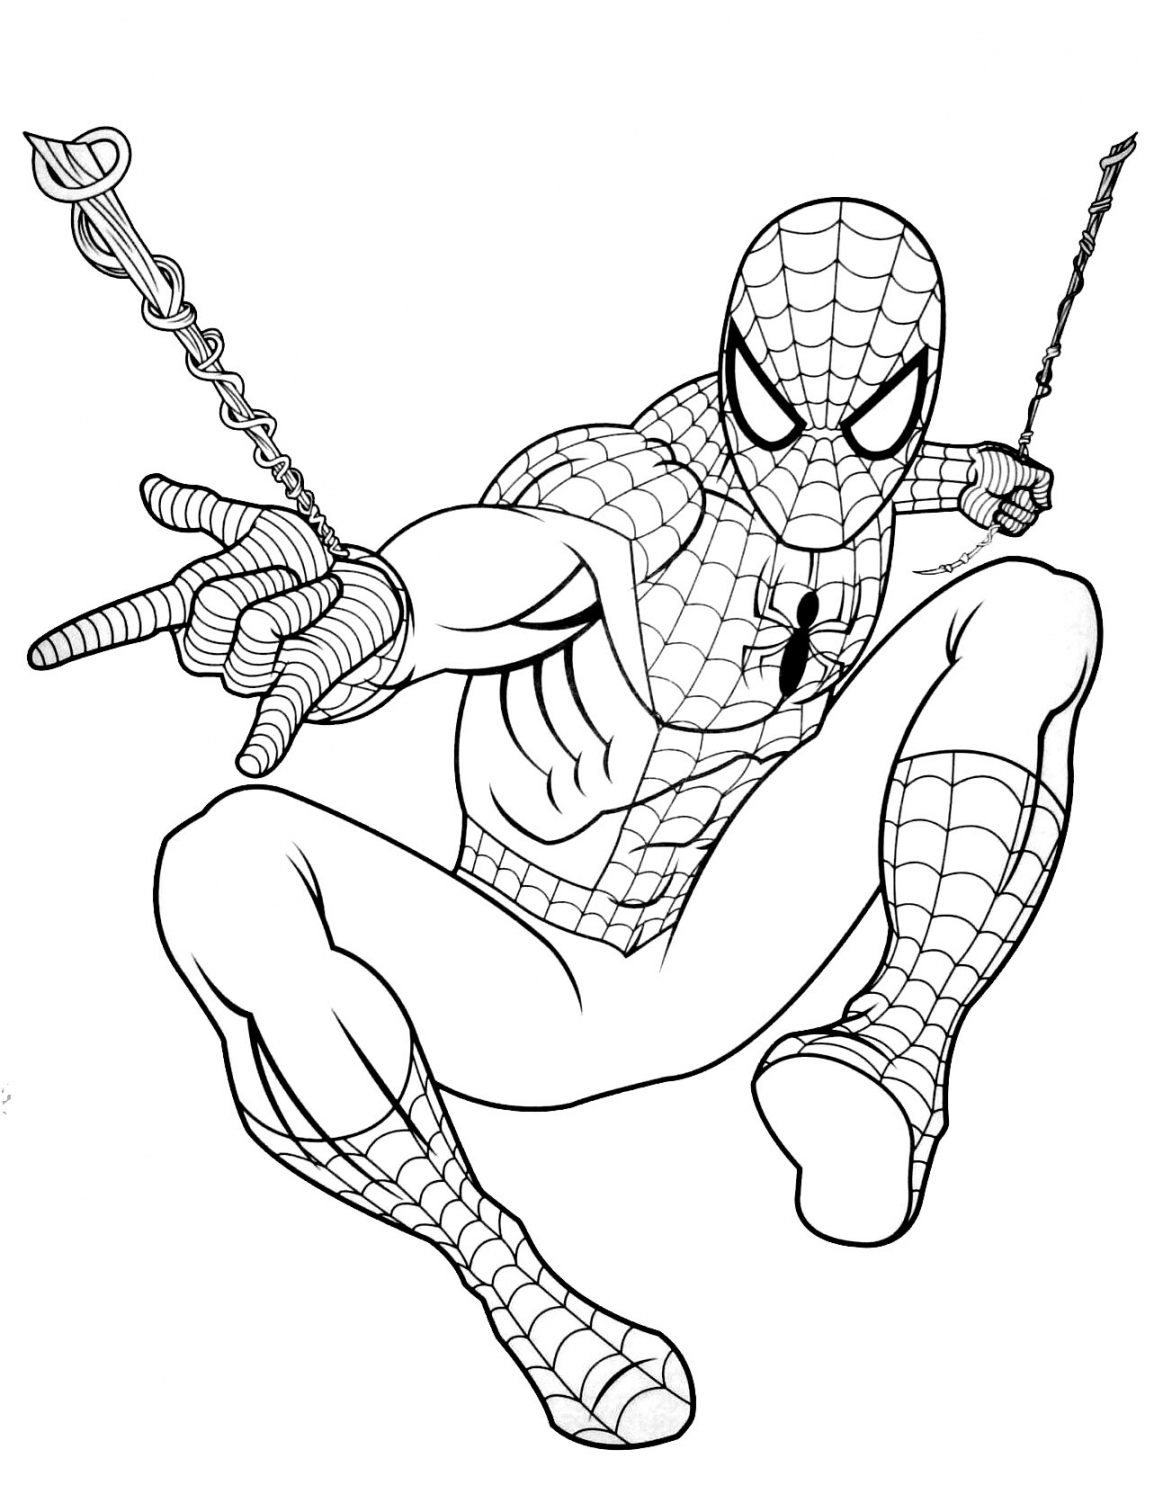 Free Spiderman drawing to print and color - Spiderman Kids  - FREE Printables - Spiderman Free Printable Coloring Pages